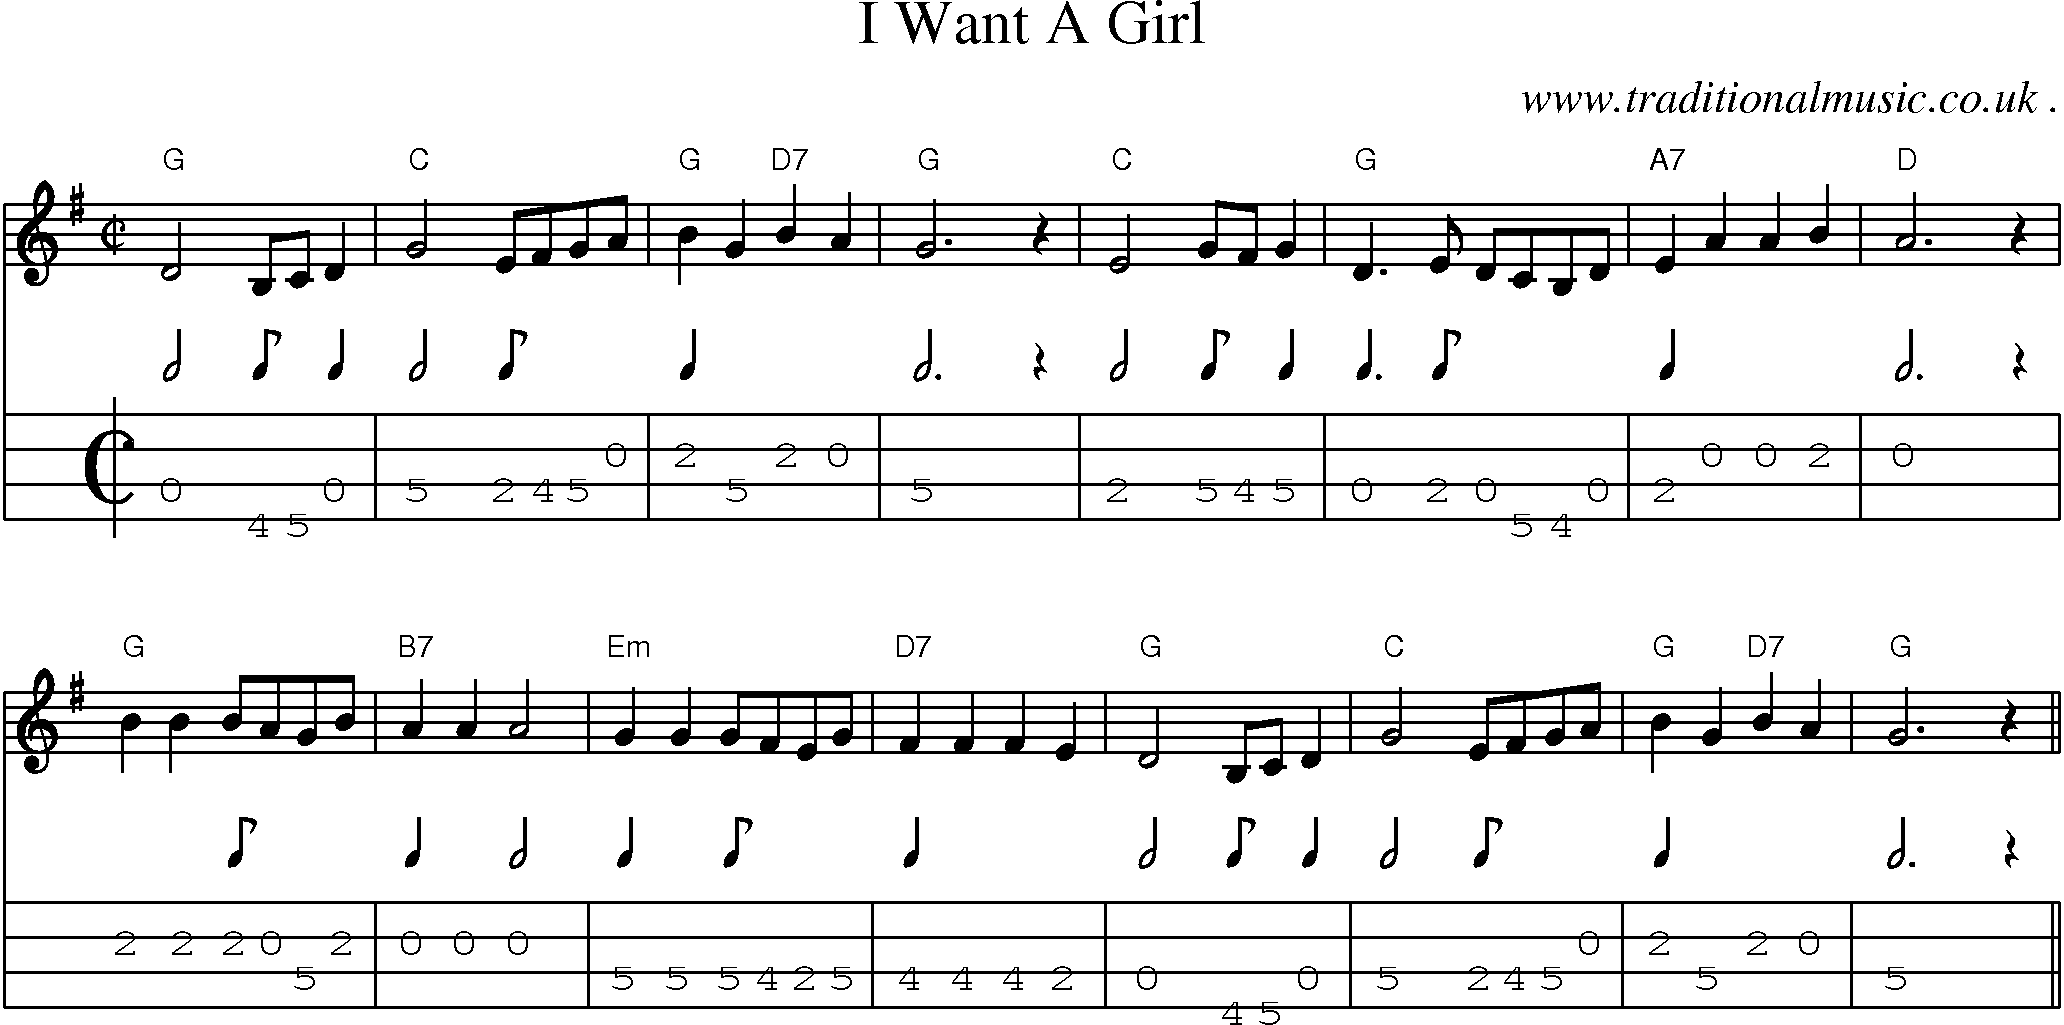 Music Score and Guitar Tabs for I Want A Girl